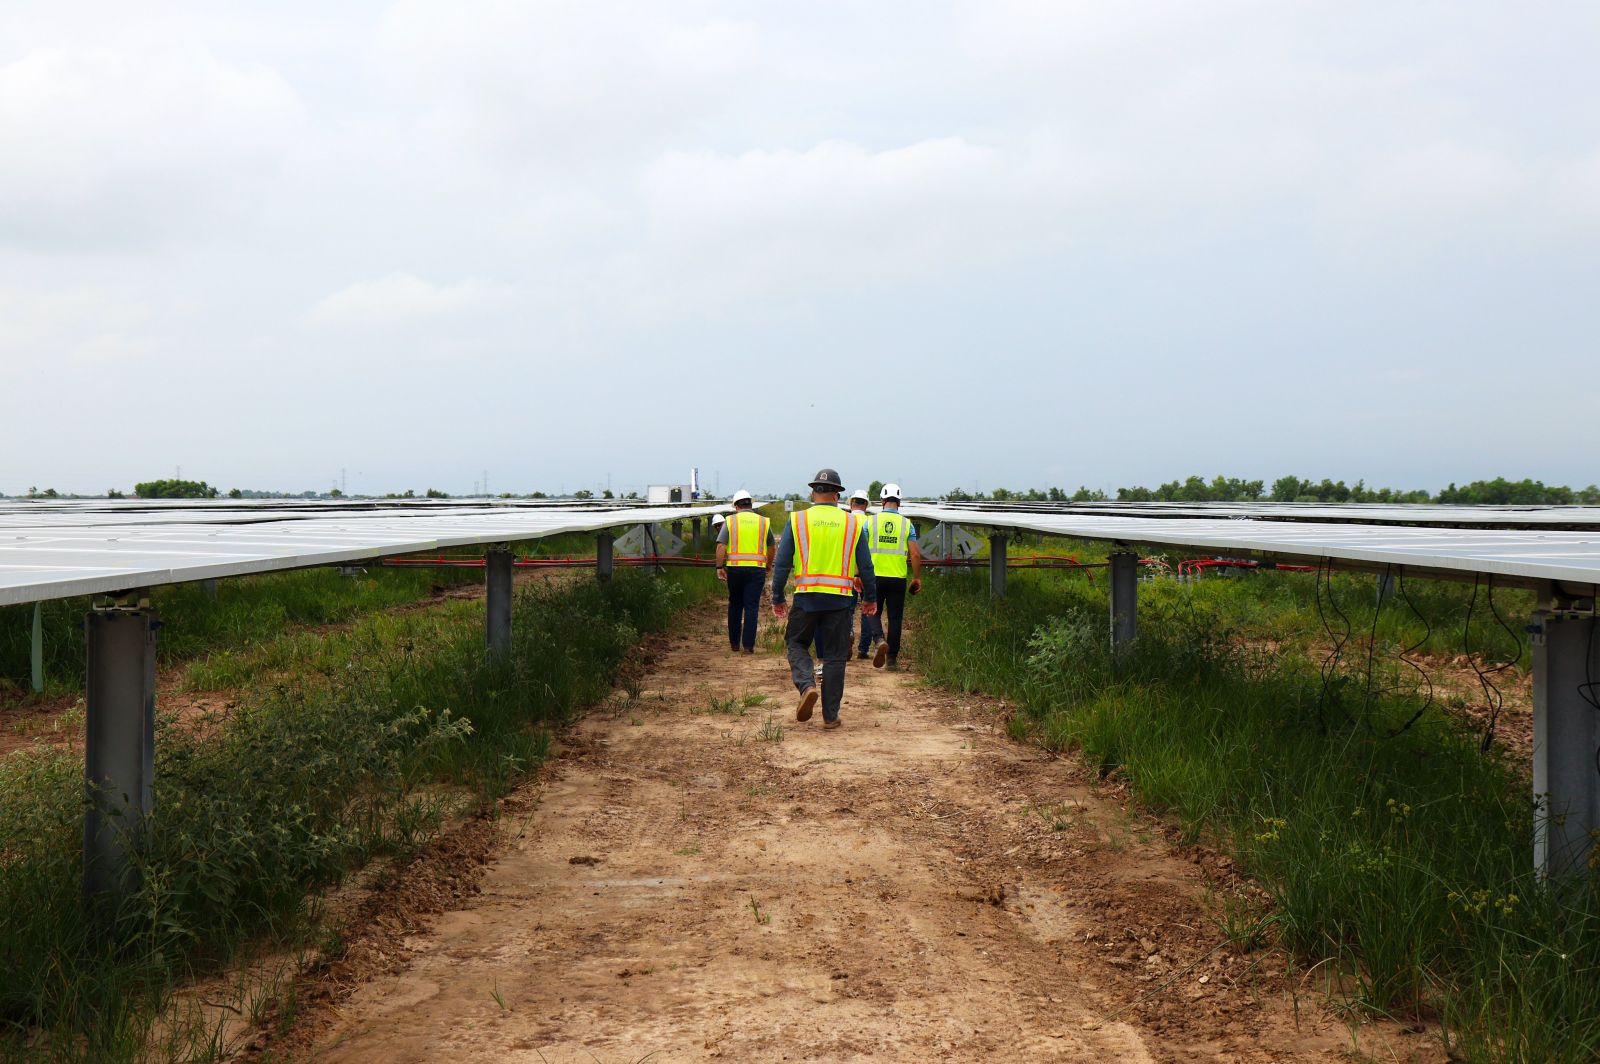 yellow vest workers walking center solar rows